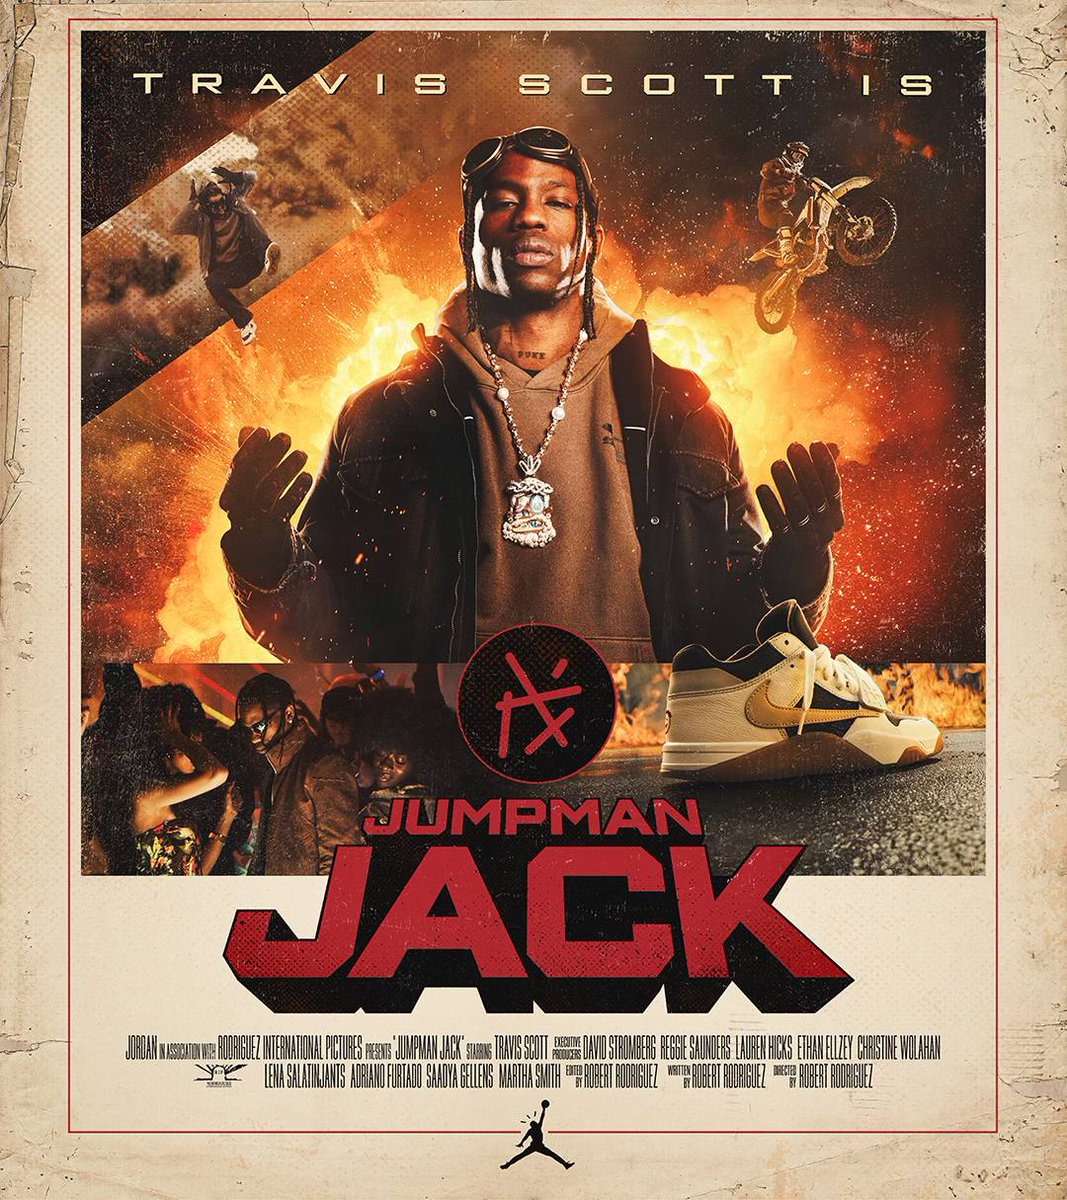 Had a great time also making this poster for @trvisXX Jumpman Jack and @jumpman23